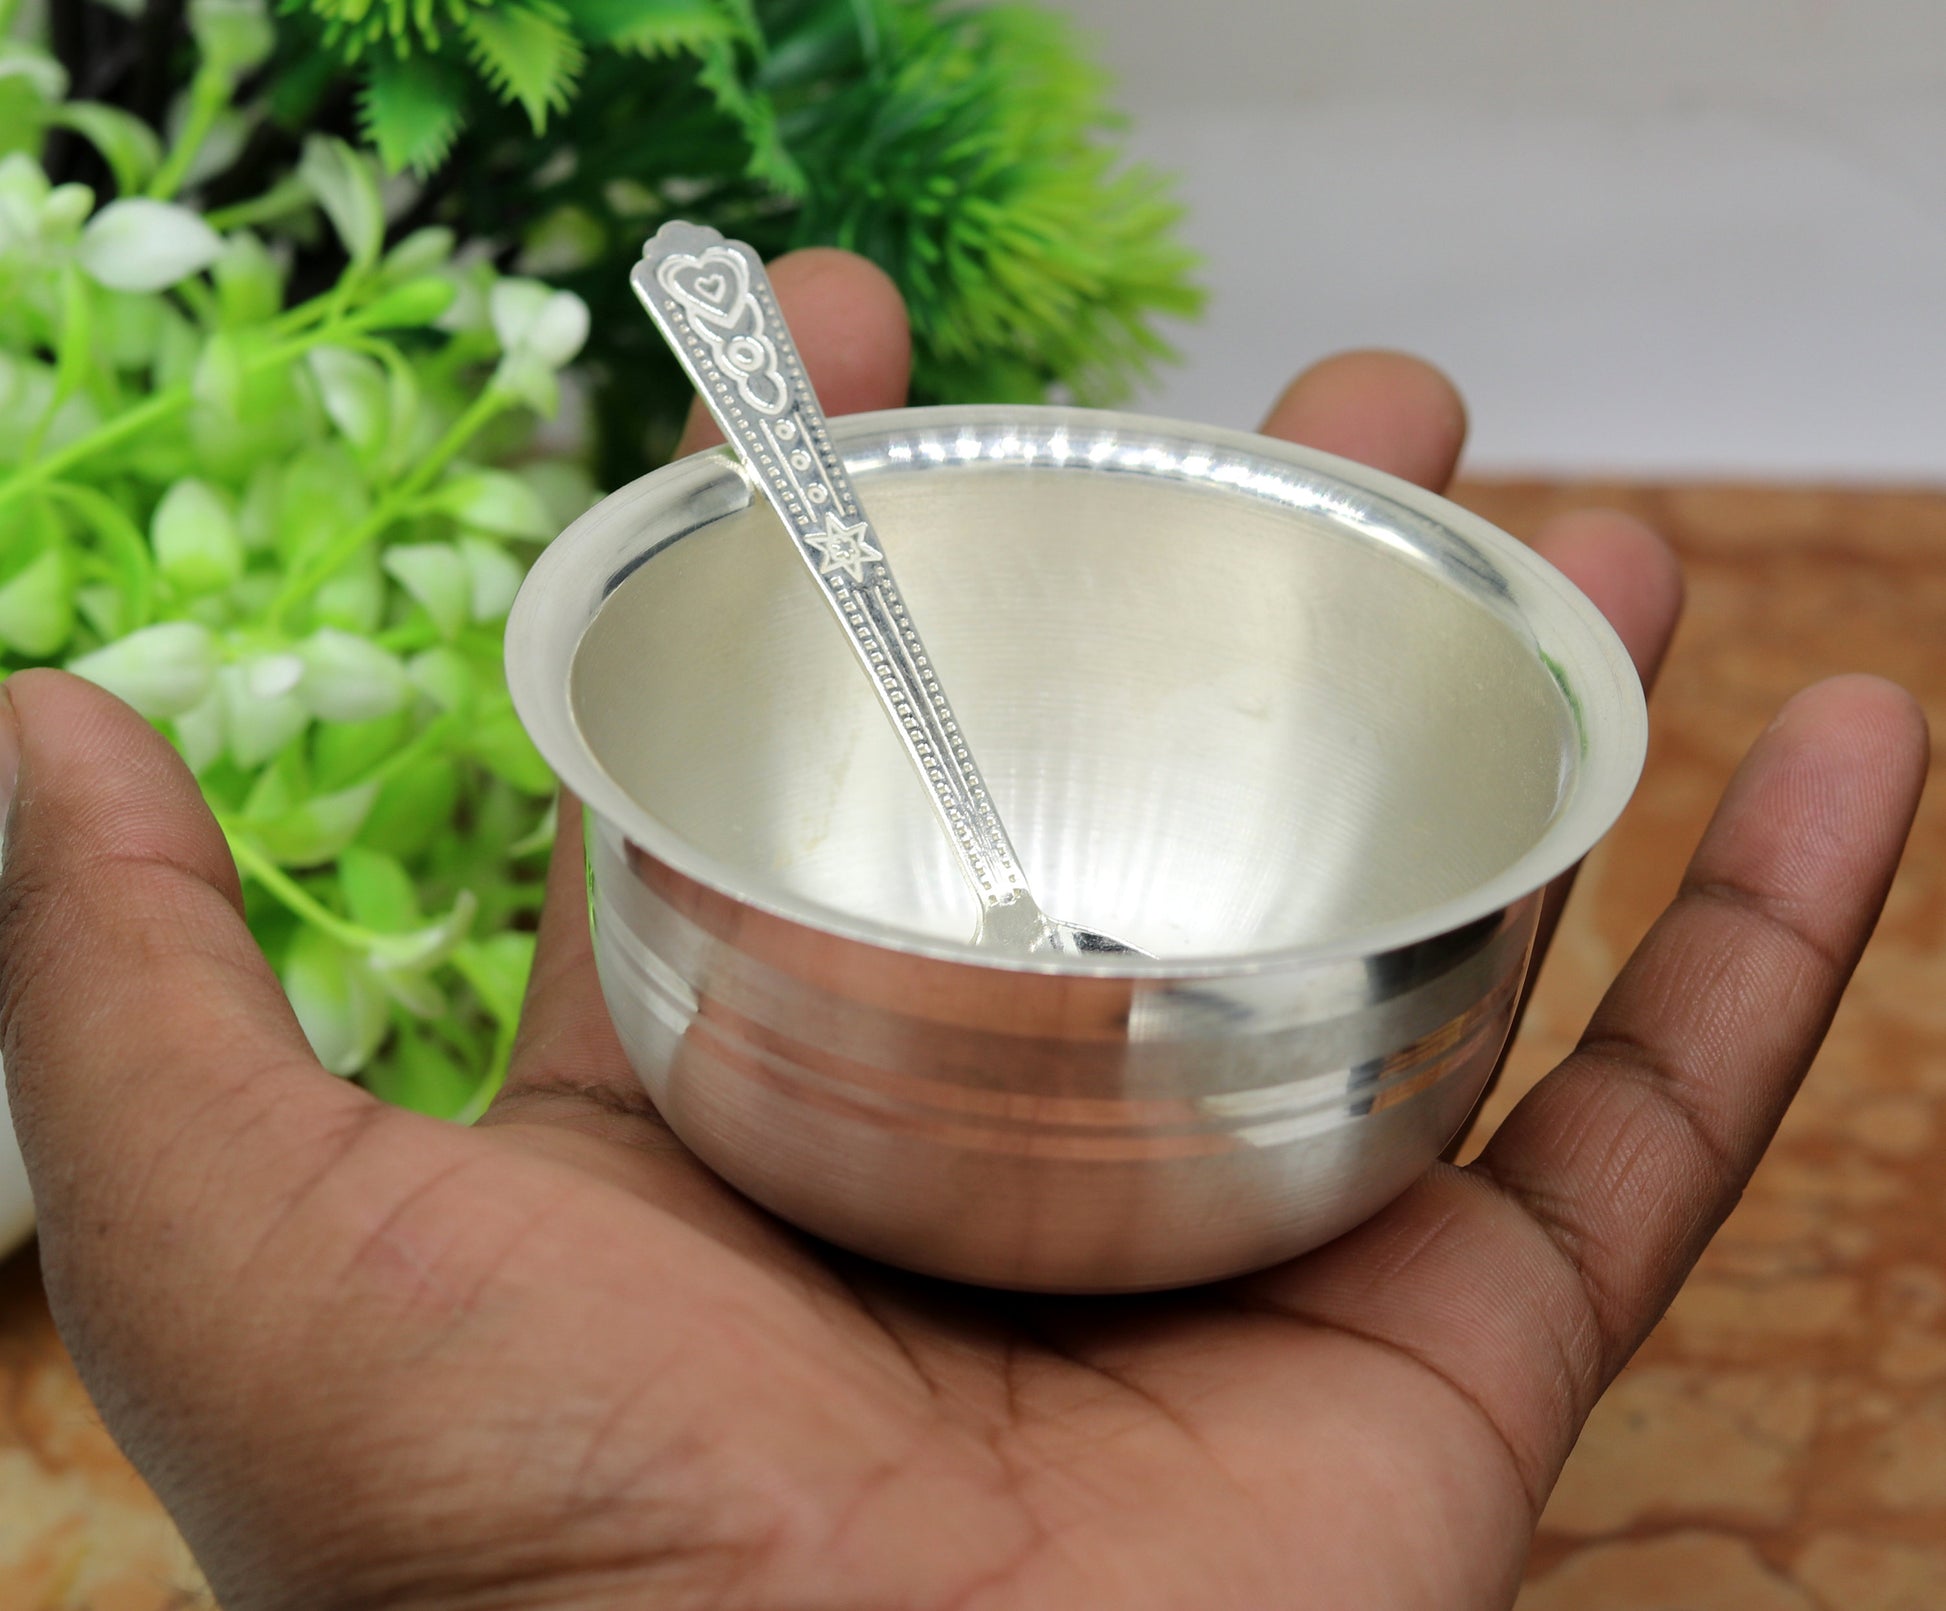 999 pure sterling silver handmade solid silver bowl and spoon, silver has antibacterial properties, keep stay healthy, silver vessels sv63 - TRIBAL ORNAMENTS